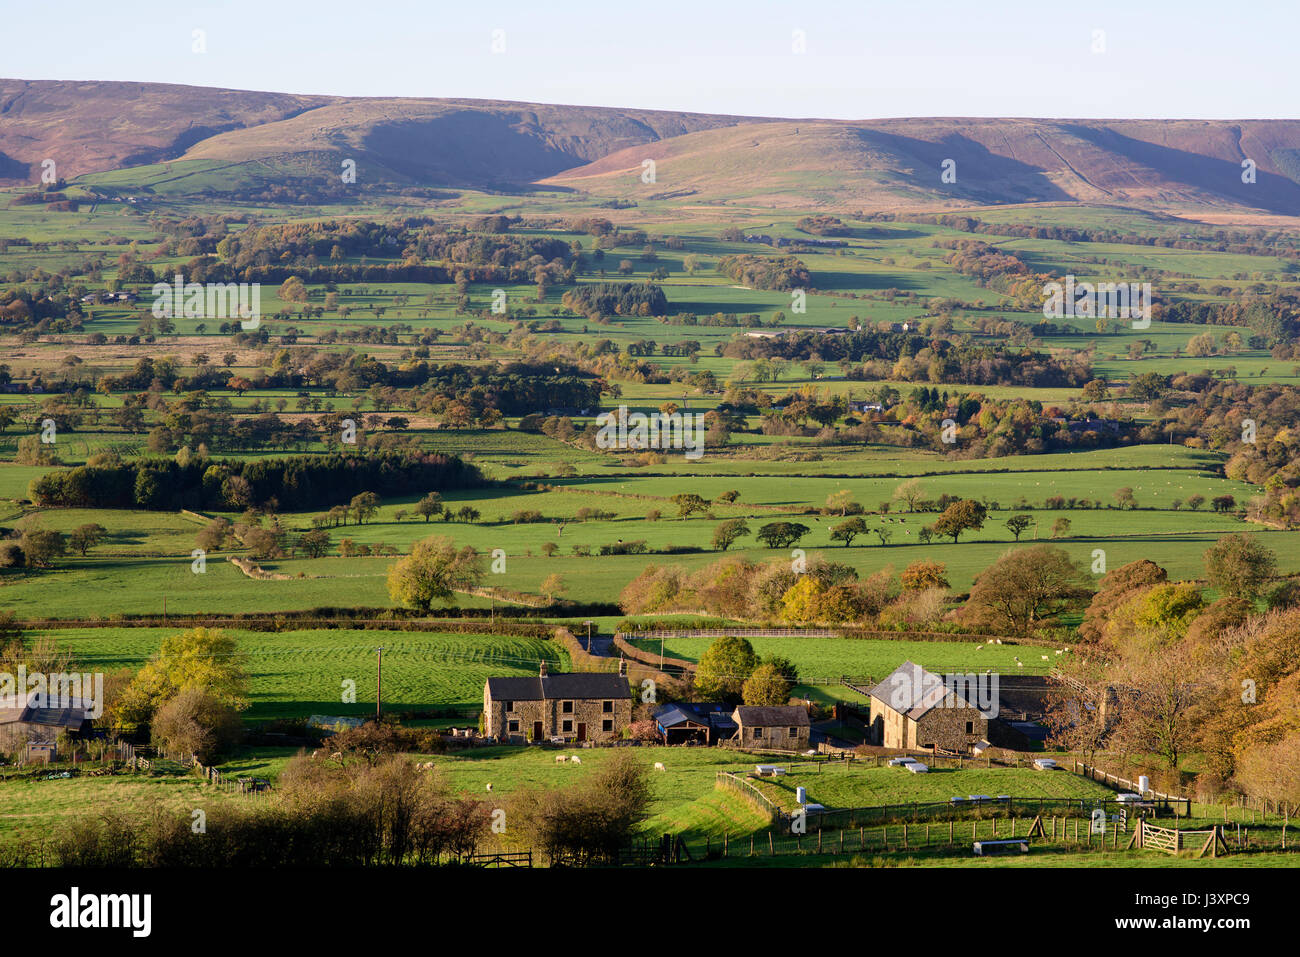 A view of the Loud Valley looking towards Bowland Fells from Longridge Fell, Forest of Bowland, Lancashire. Stock Photo